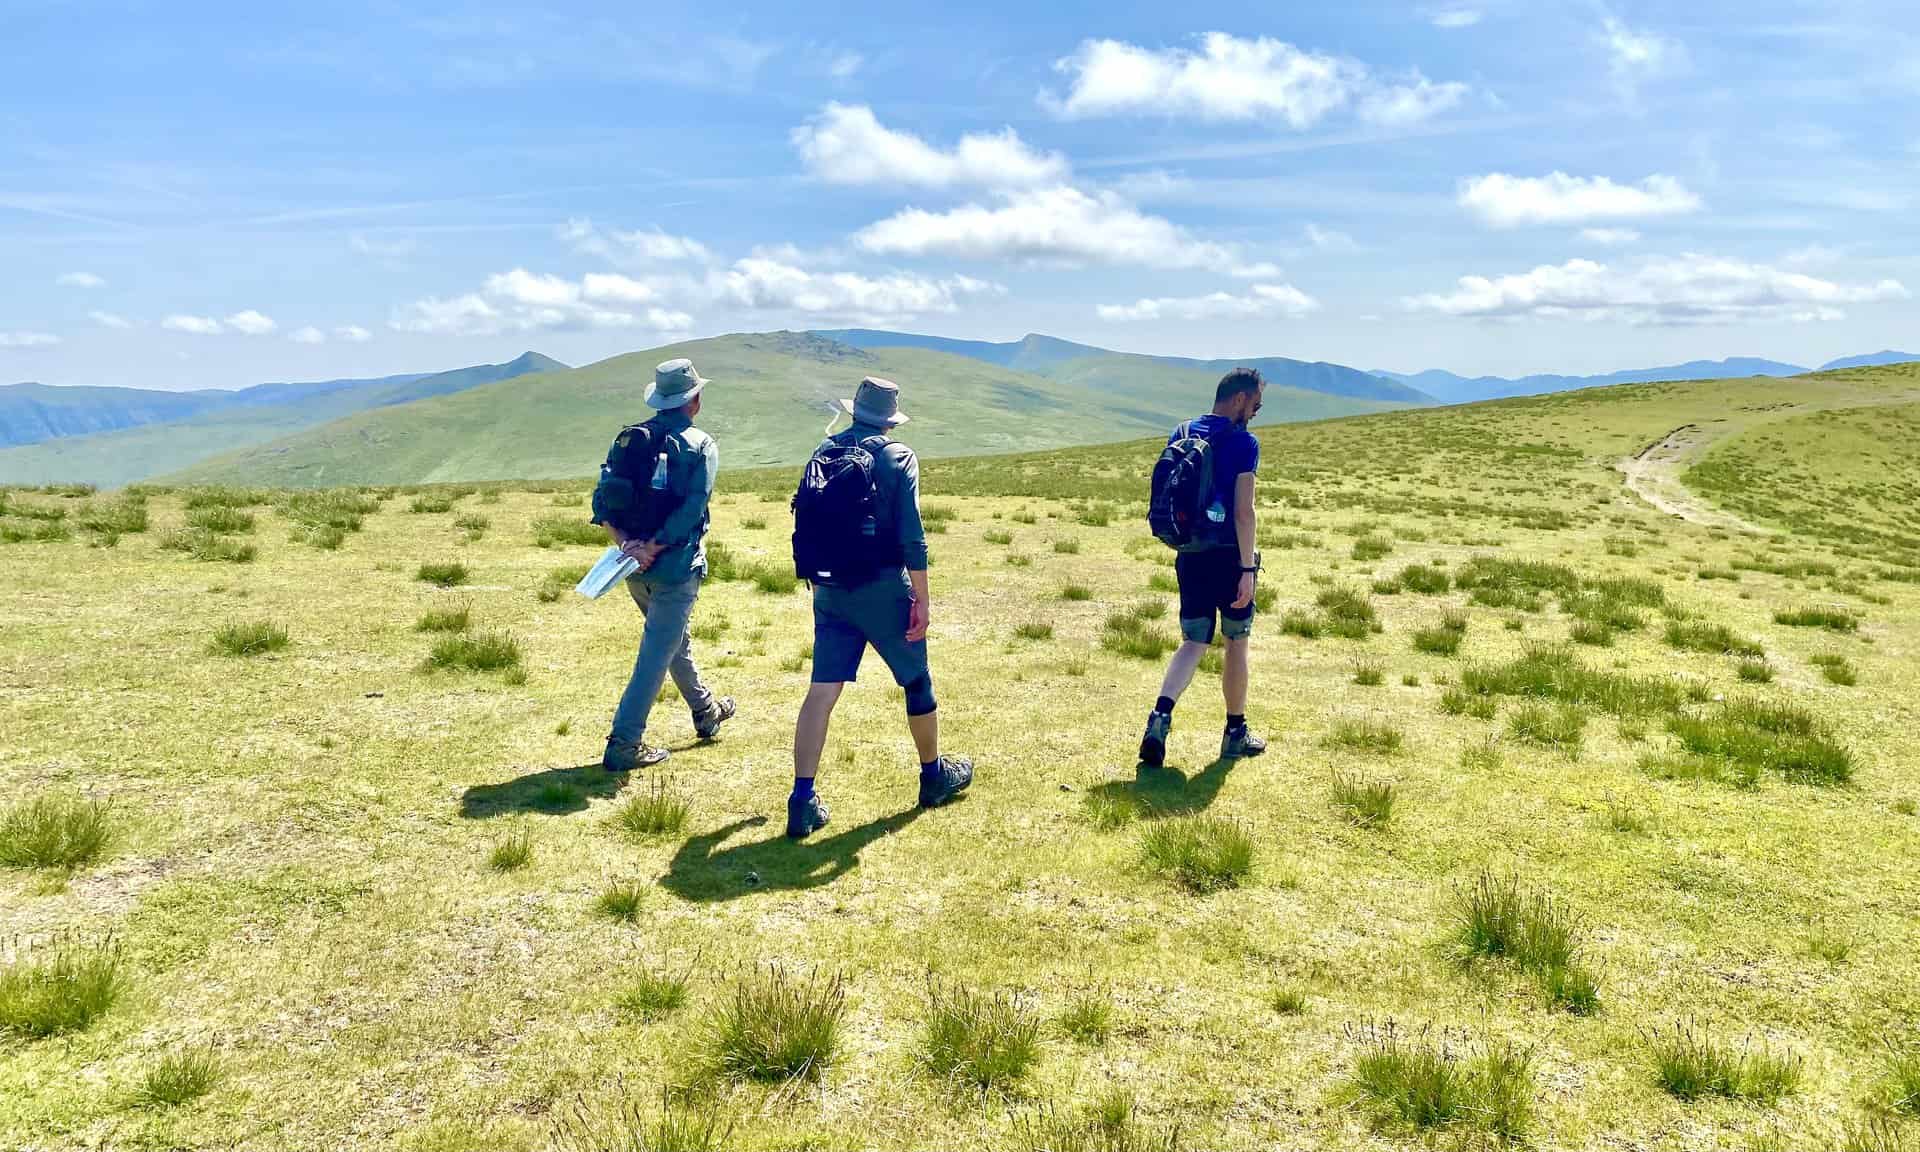 Heading south from Stybarrow Dodd to Sticks Pass on our Great Dodd walk.